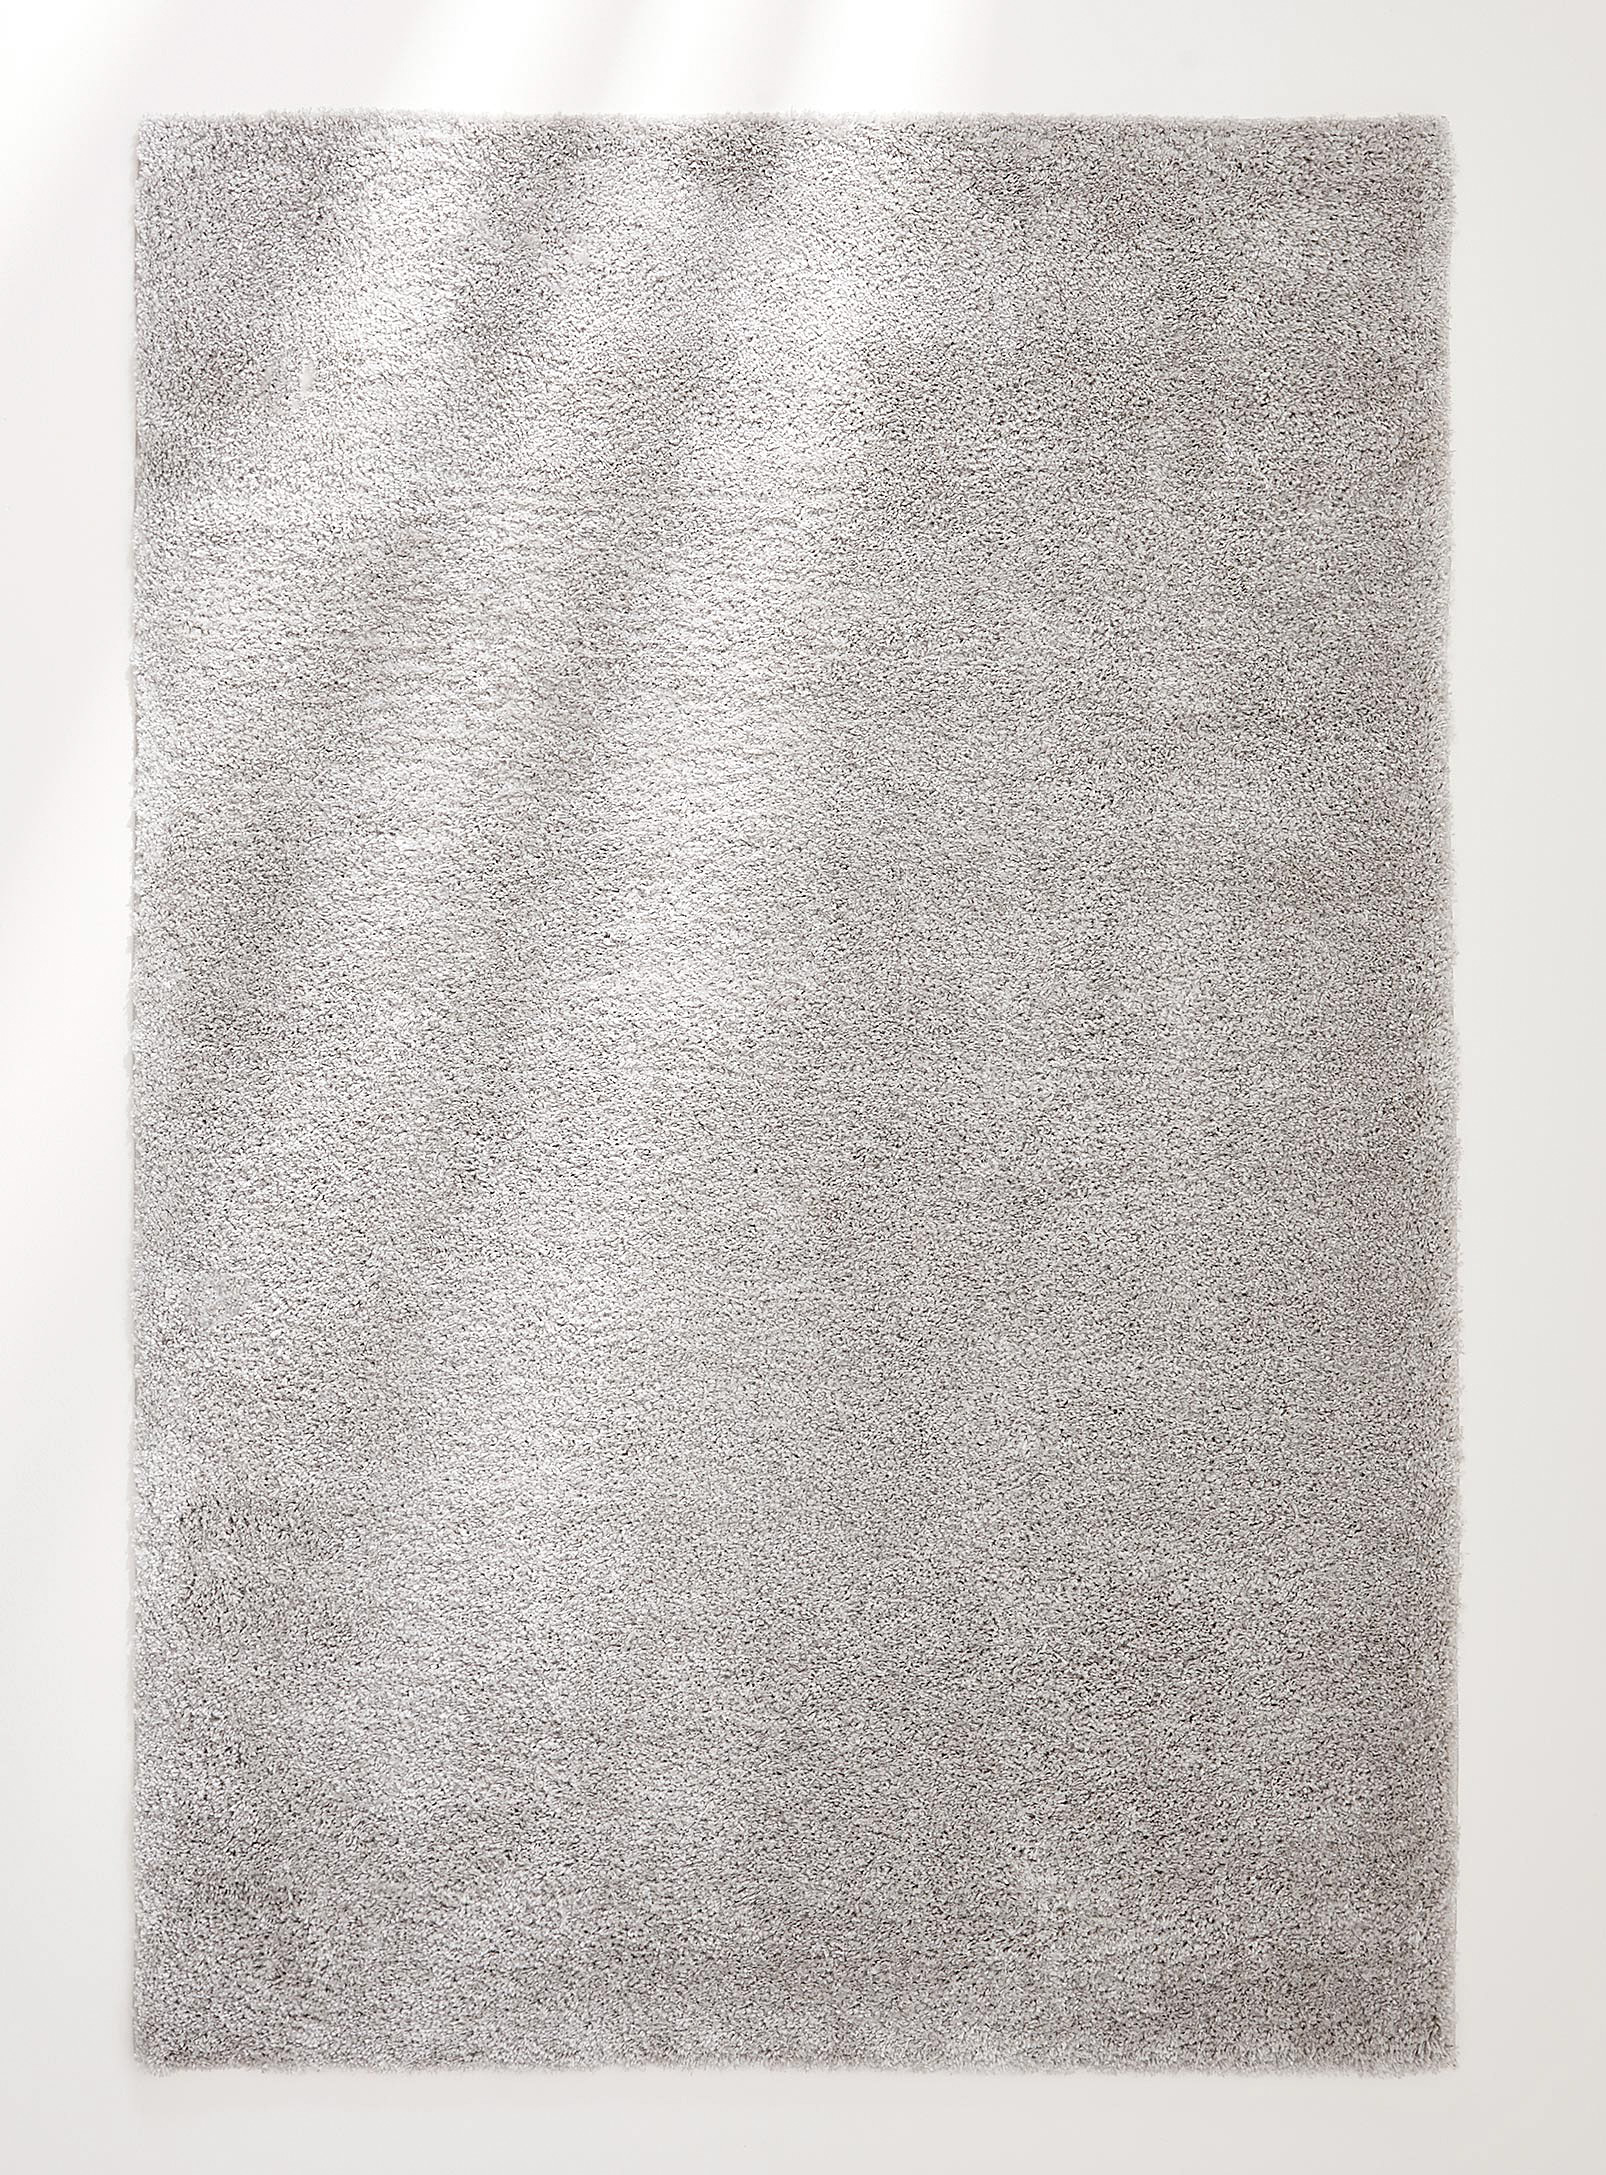 Simons Maison Nature's Essence Shag Rug See Available Sizes In Light Grey